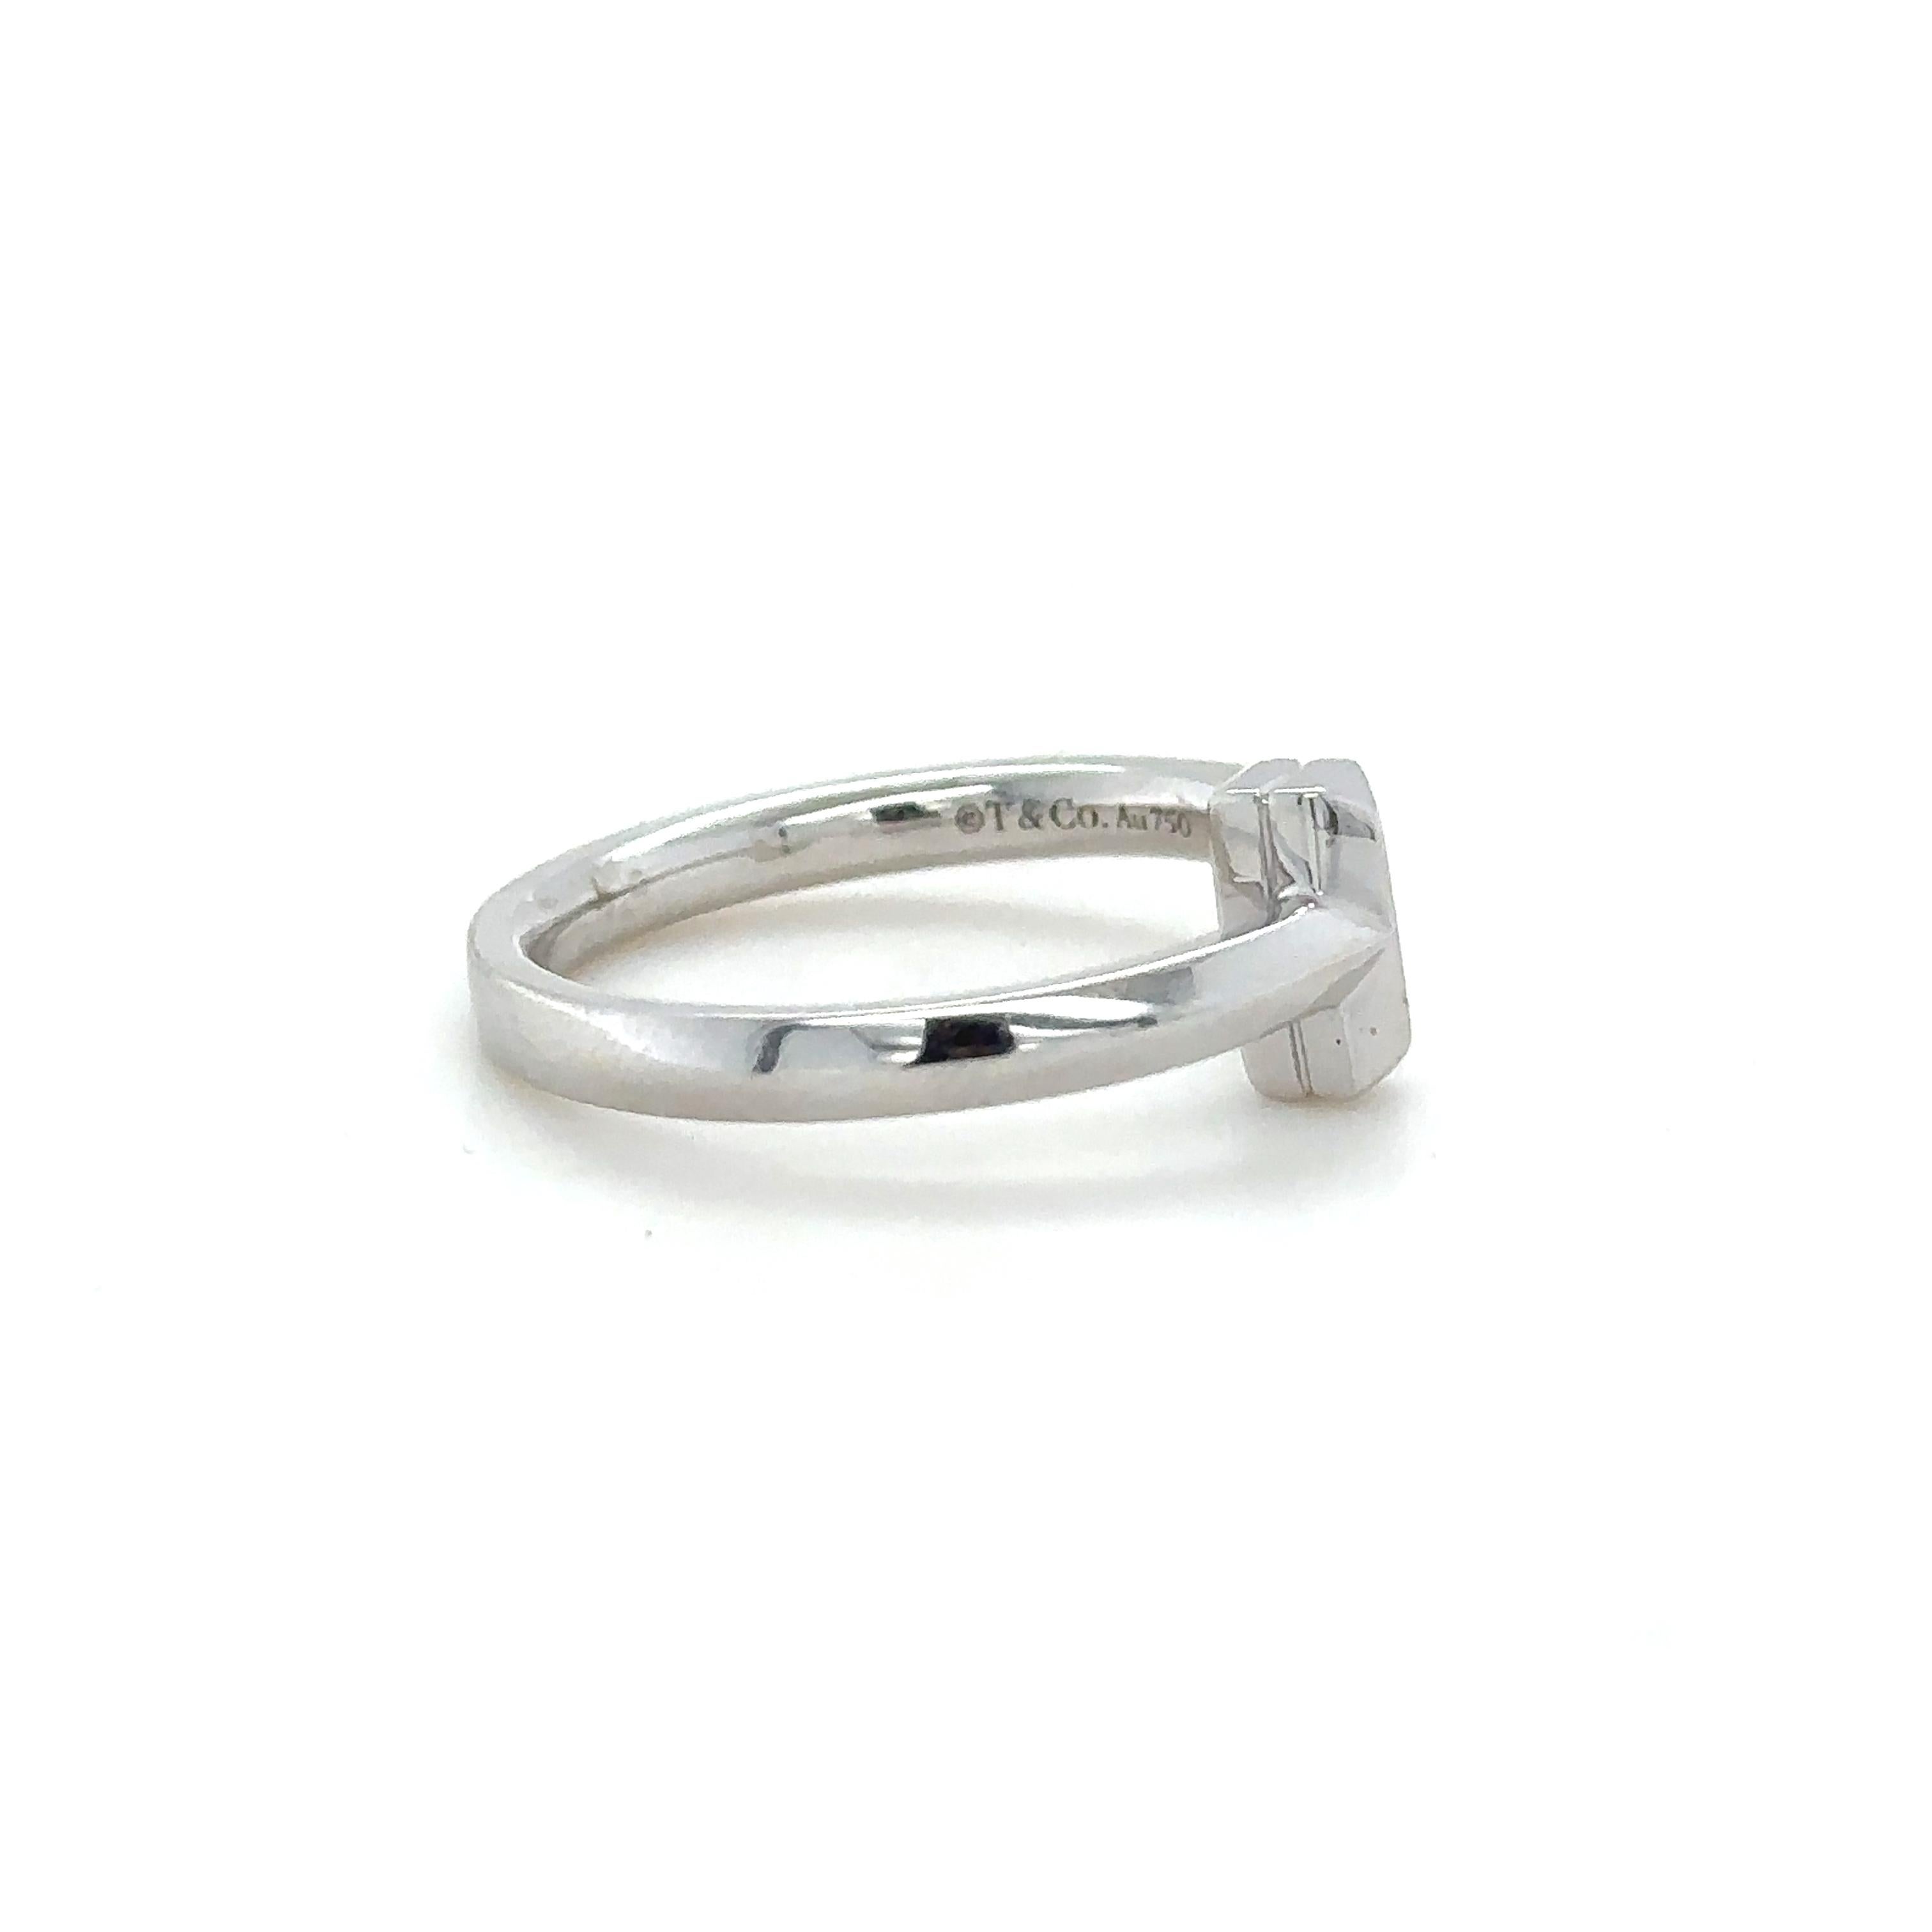 Tiffany & Co 18ct White Gold Tiffany T T1 ring.

Band 2.5mm, Weight 4.77 grams

Metal: 18ct White Gold
Carat: N/A
Colour: N/A
Clarity:  N/A
Cut: N/A
Weight: 4.77 grams
Engravings/Markings: T&Co. Au750

Size/Measurement: Ring Size M / band